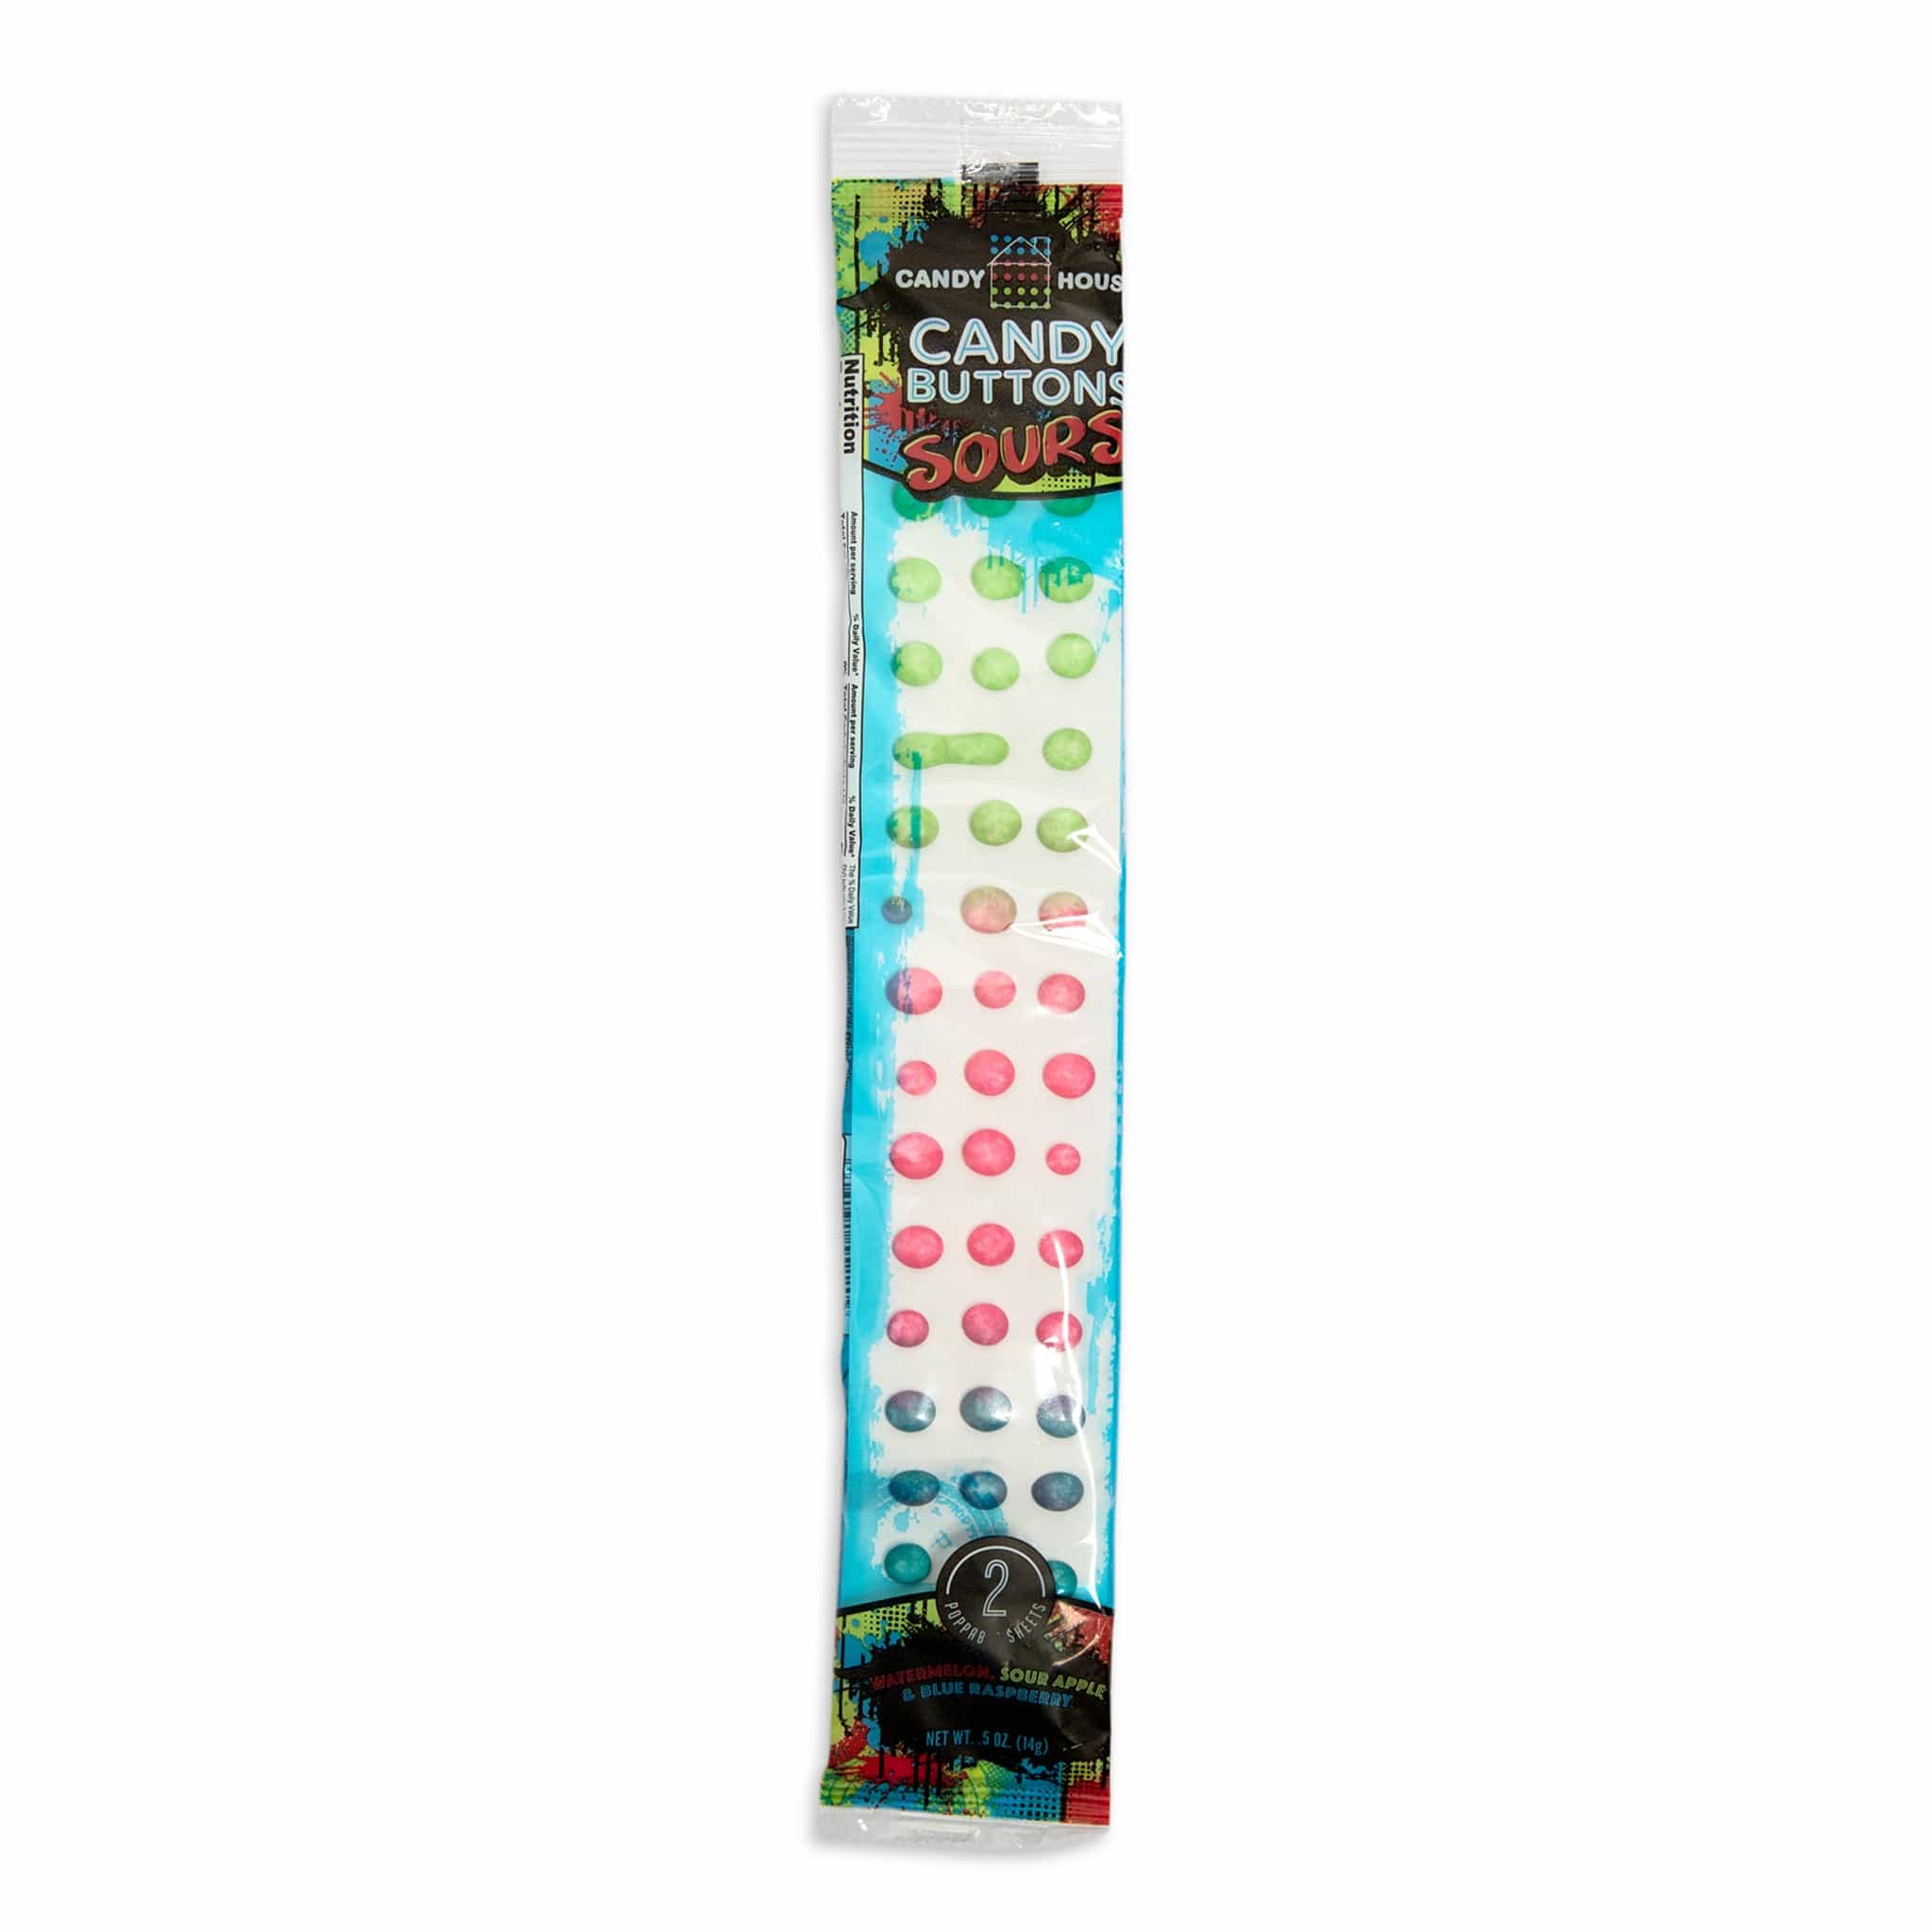 Candy House - Sour Candy Buttons